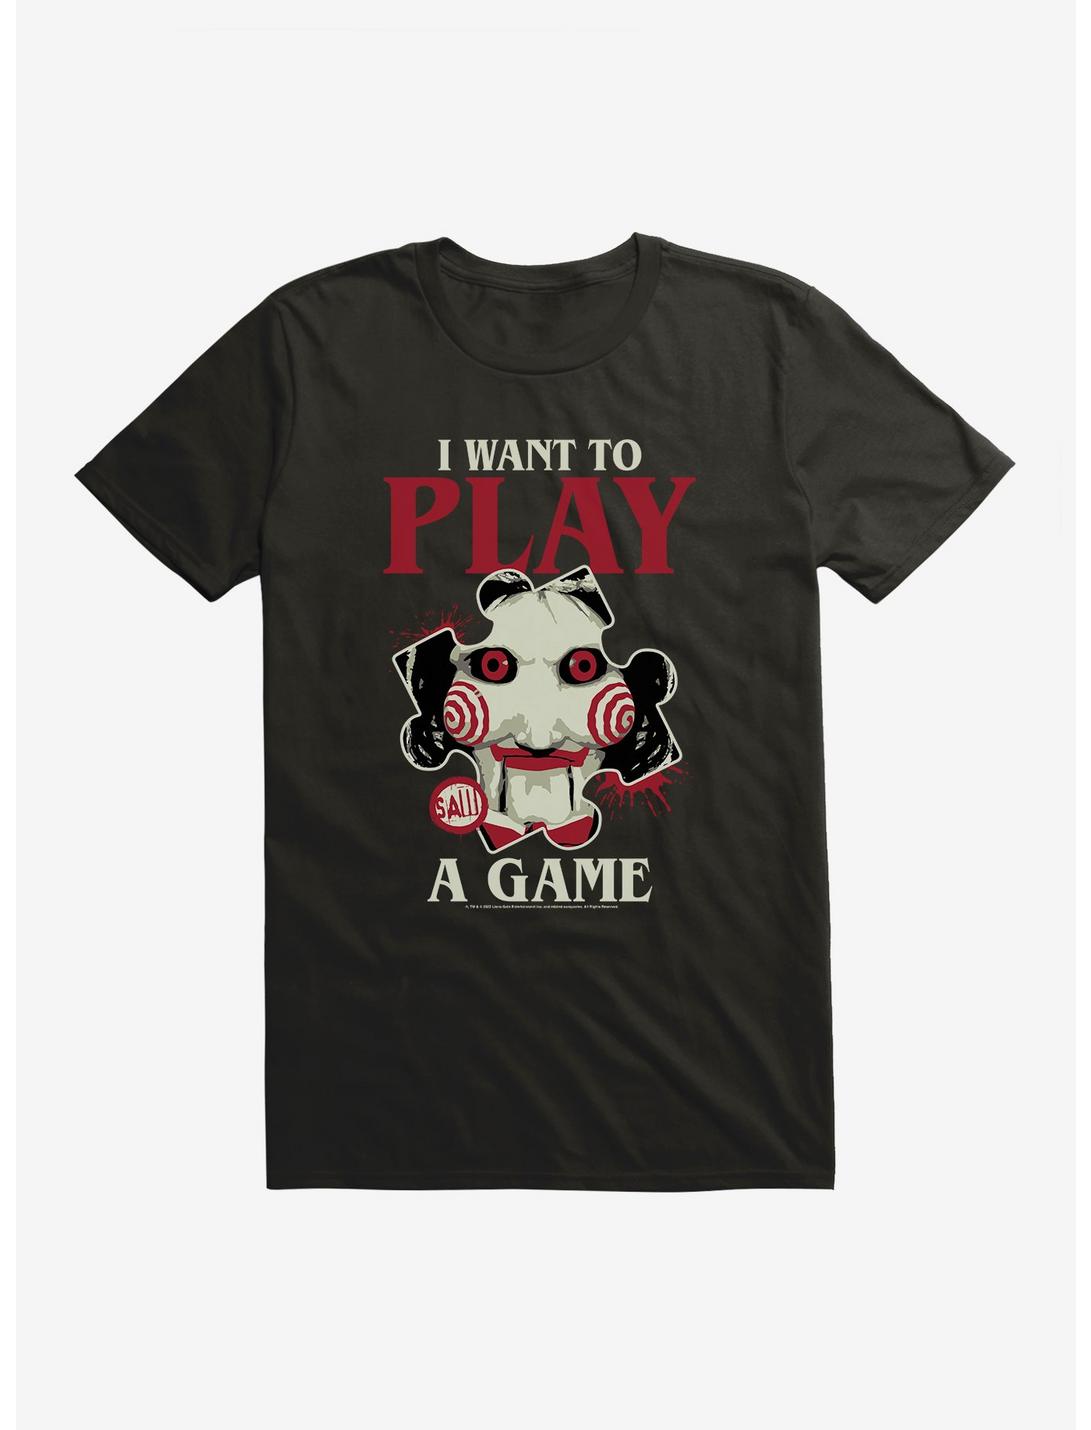 Saw I Want To Play A Game T-Shirt, BLACK, hi-res